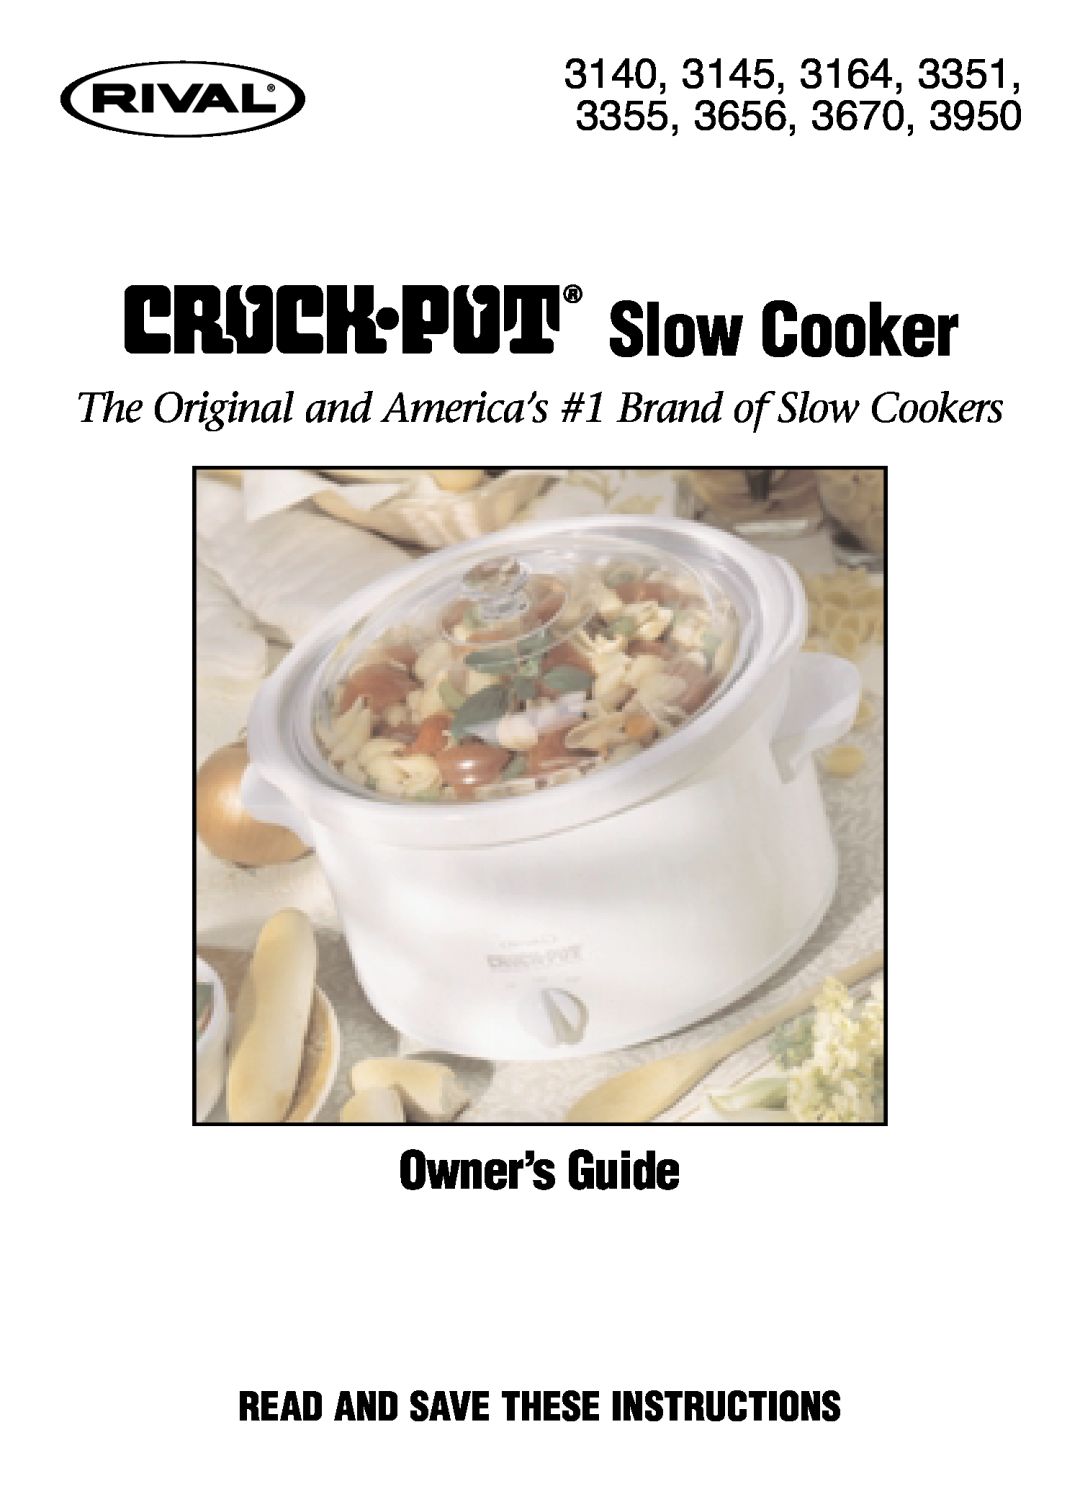 Rival 3950, 3355, 3670, 3656, 3351 manual Slow Cooker, Owner’s Guide, 3140, 3145, 3164, Read And Save These Instructions 